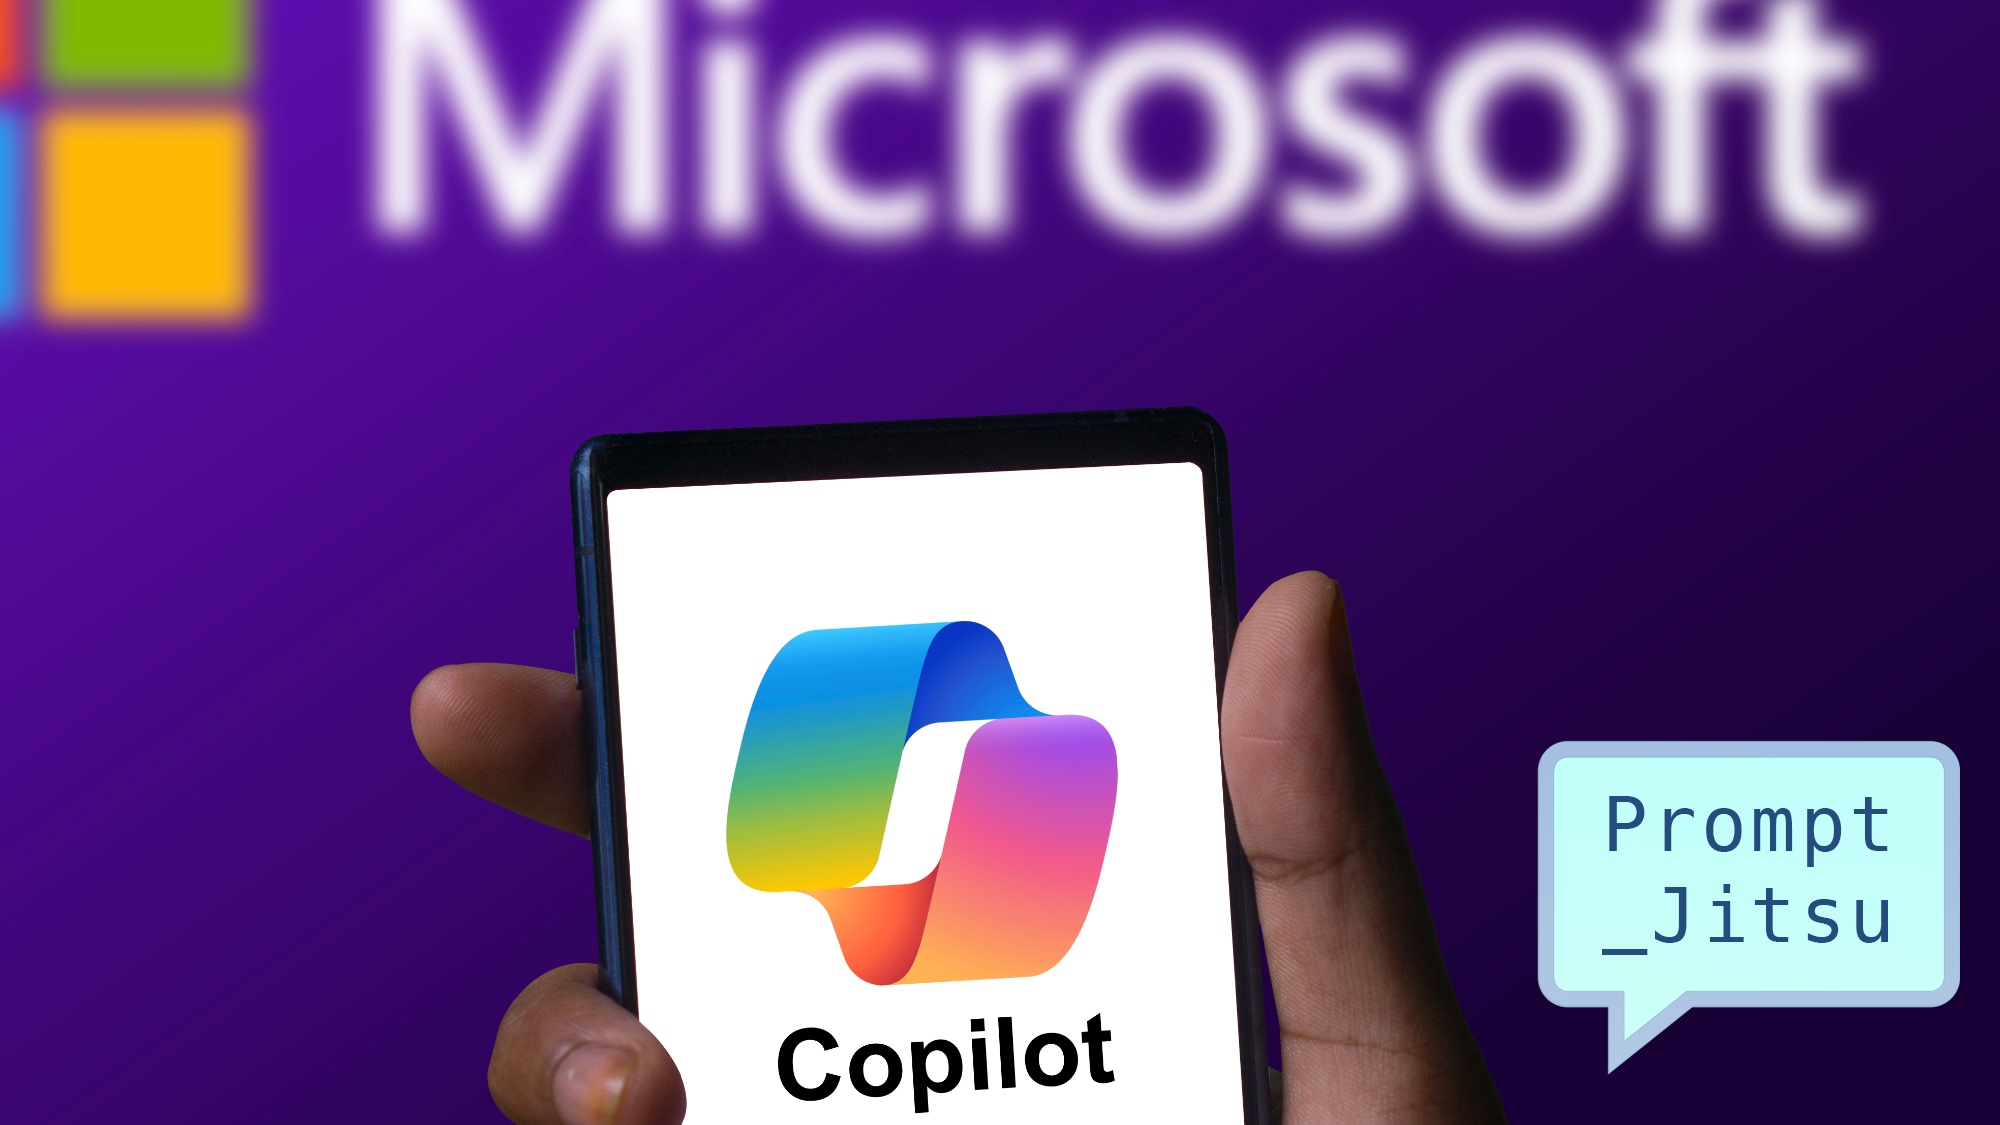 Microsoft Copilot app running on a phone with Microsoft logo in background